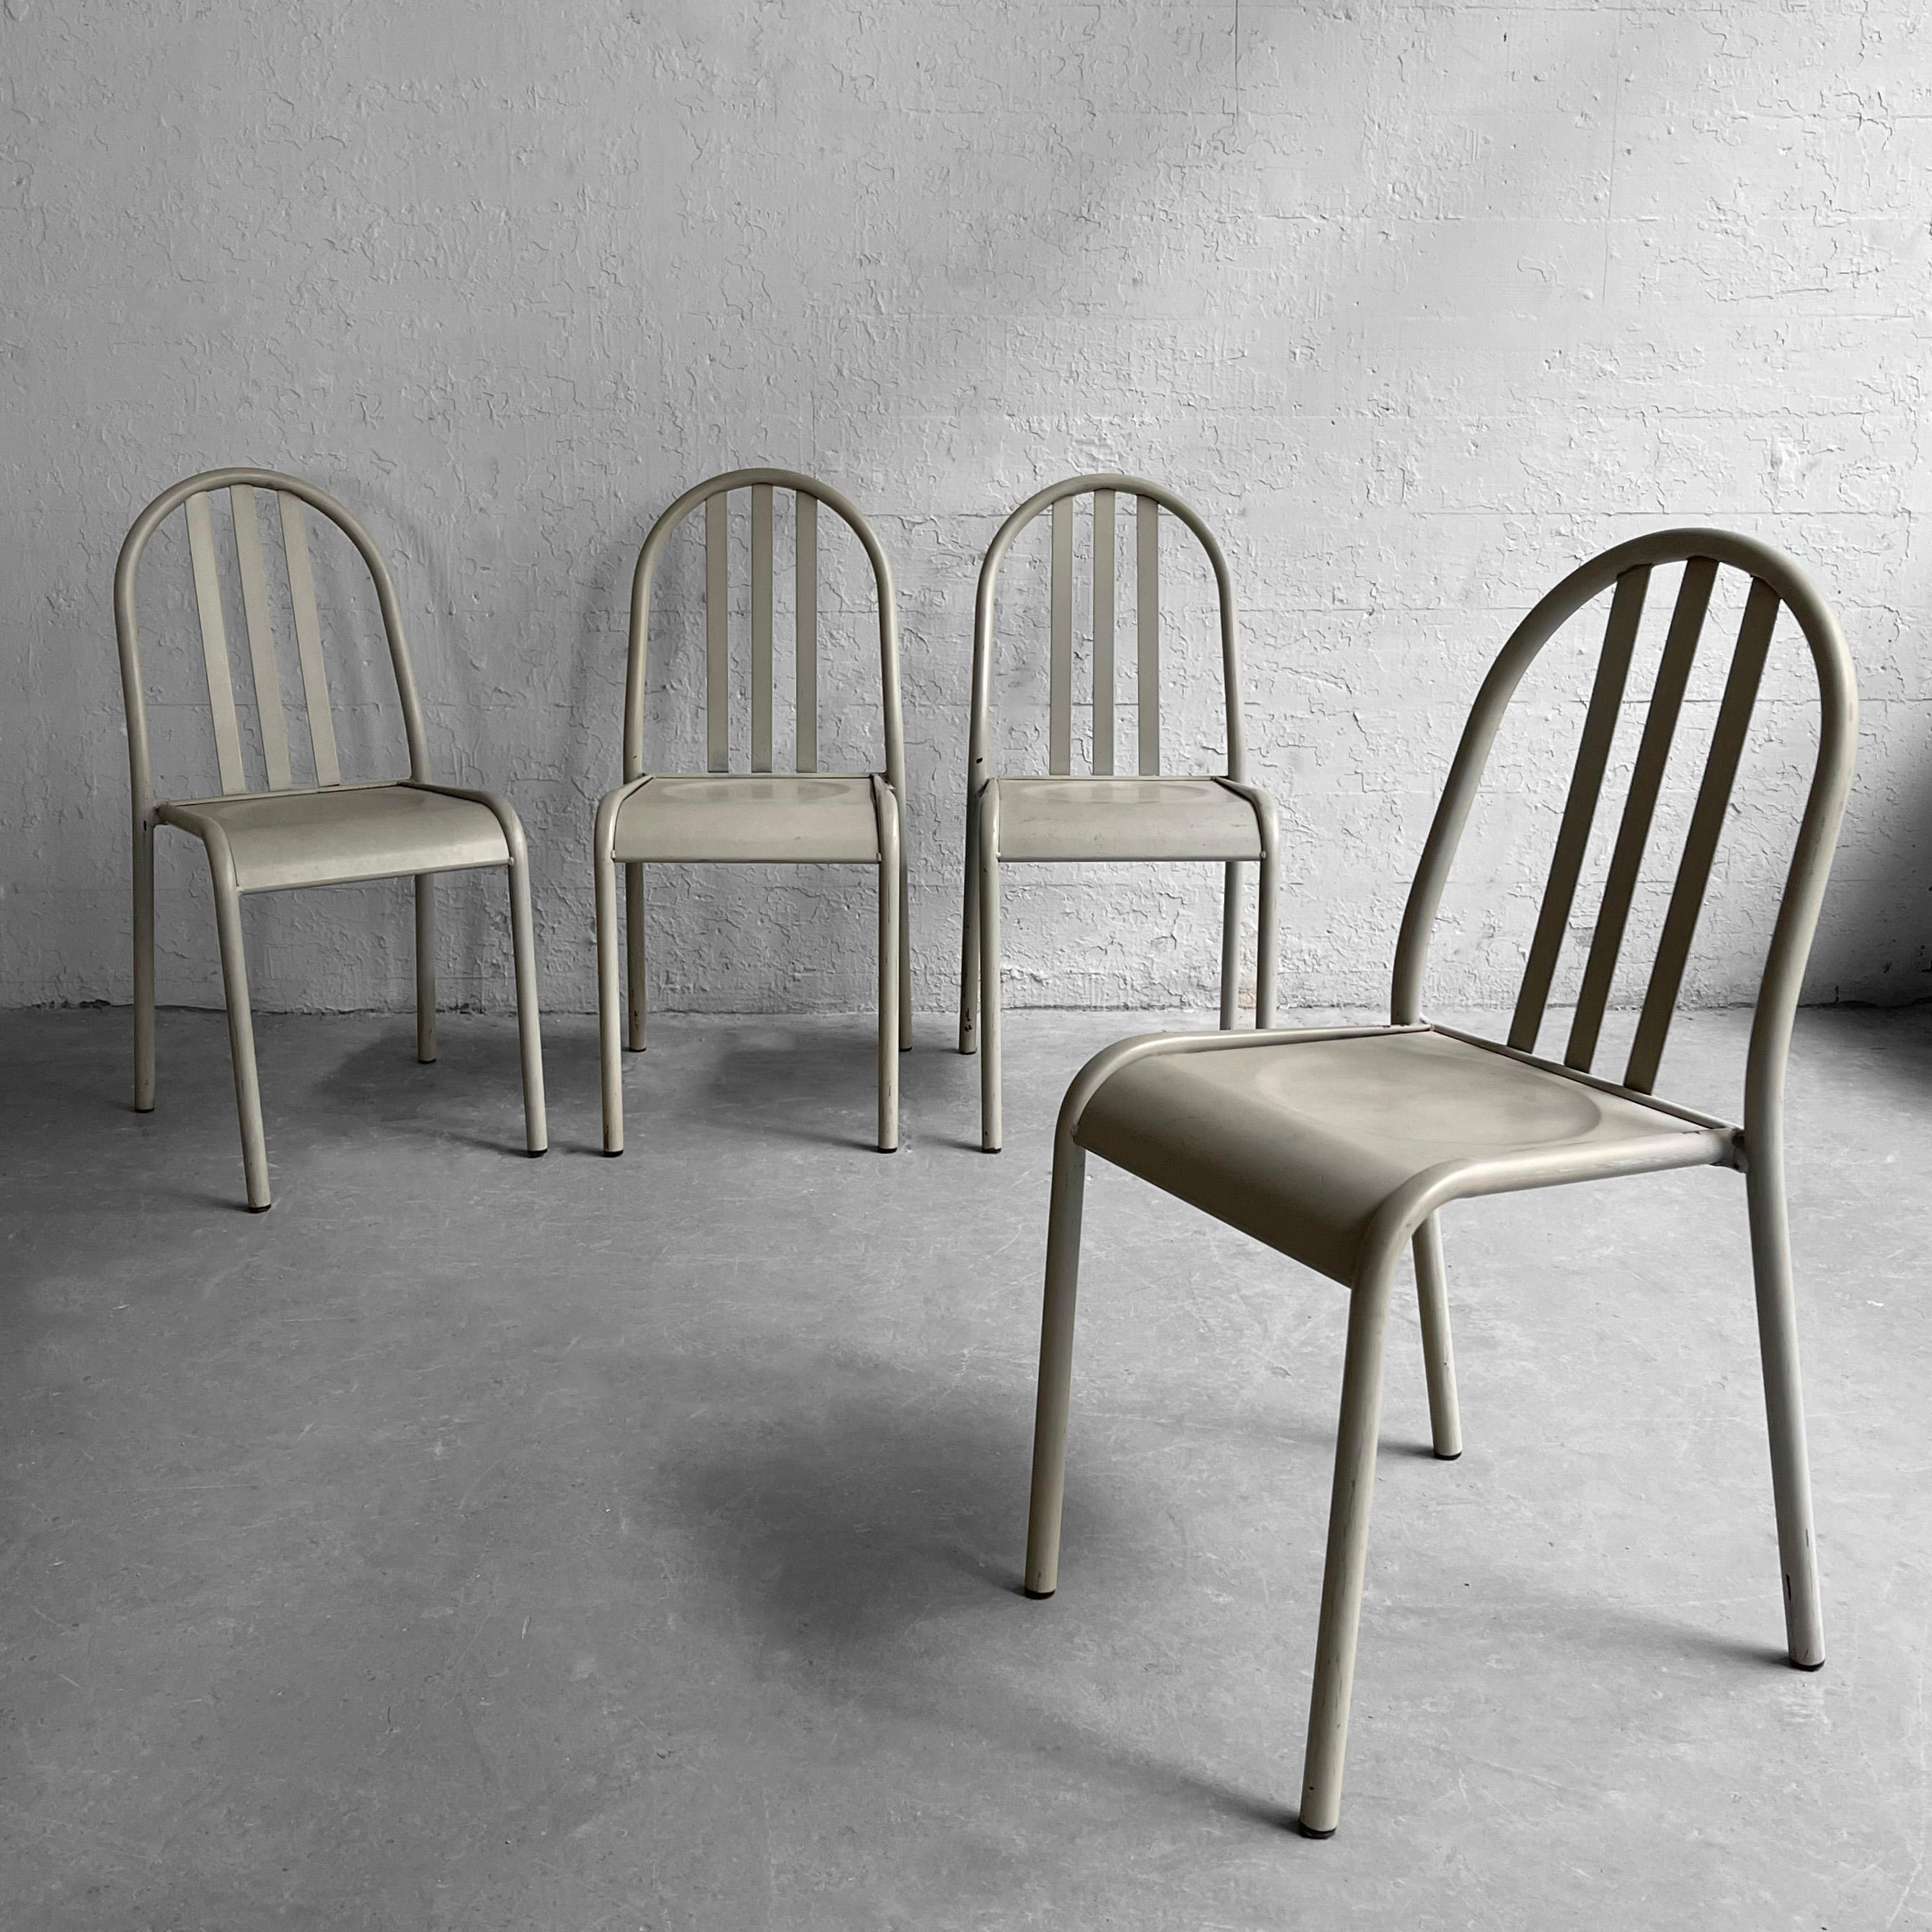 Set of 4, post modern, gray metal, dining or side chairs in the style of Robert Mallet-Stevens feature tubular frames, slat backs and contoured seats.